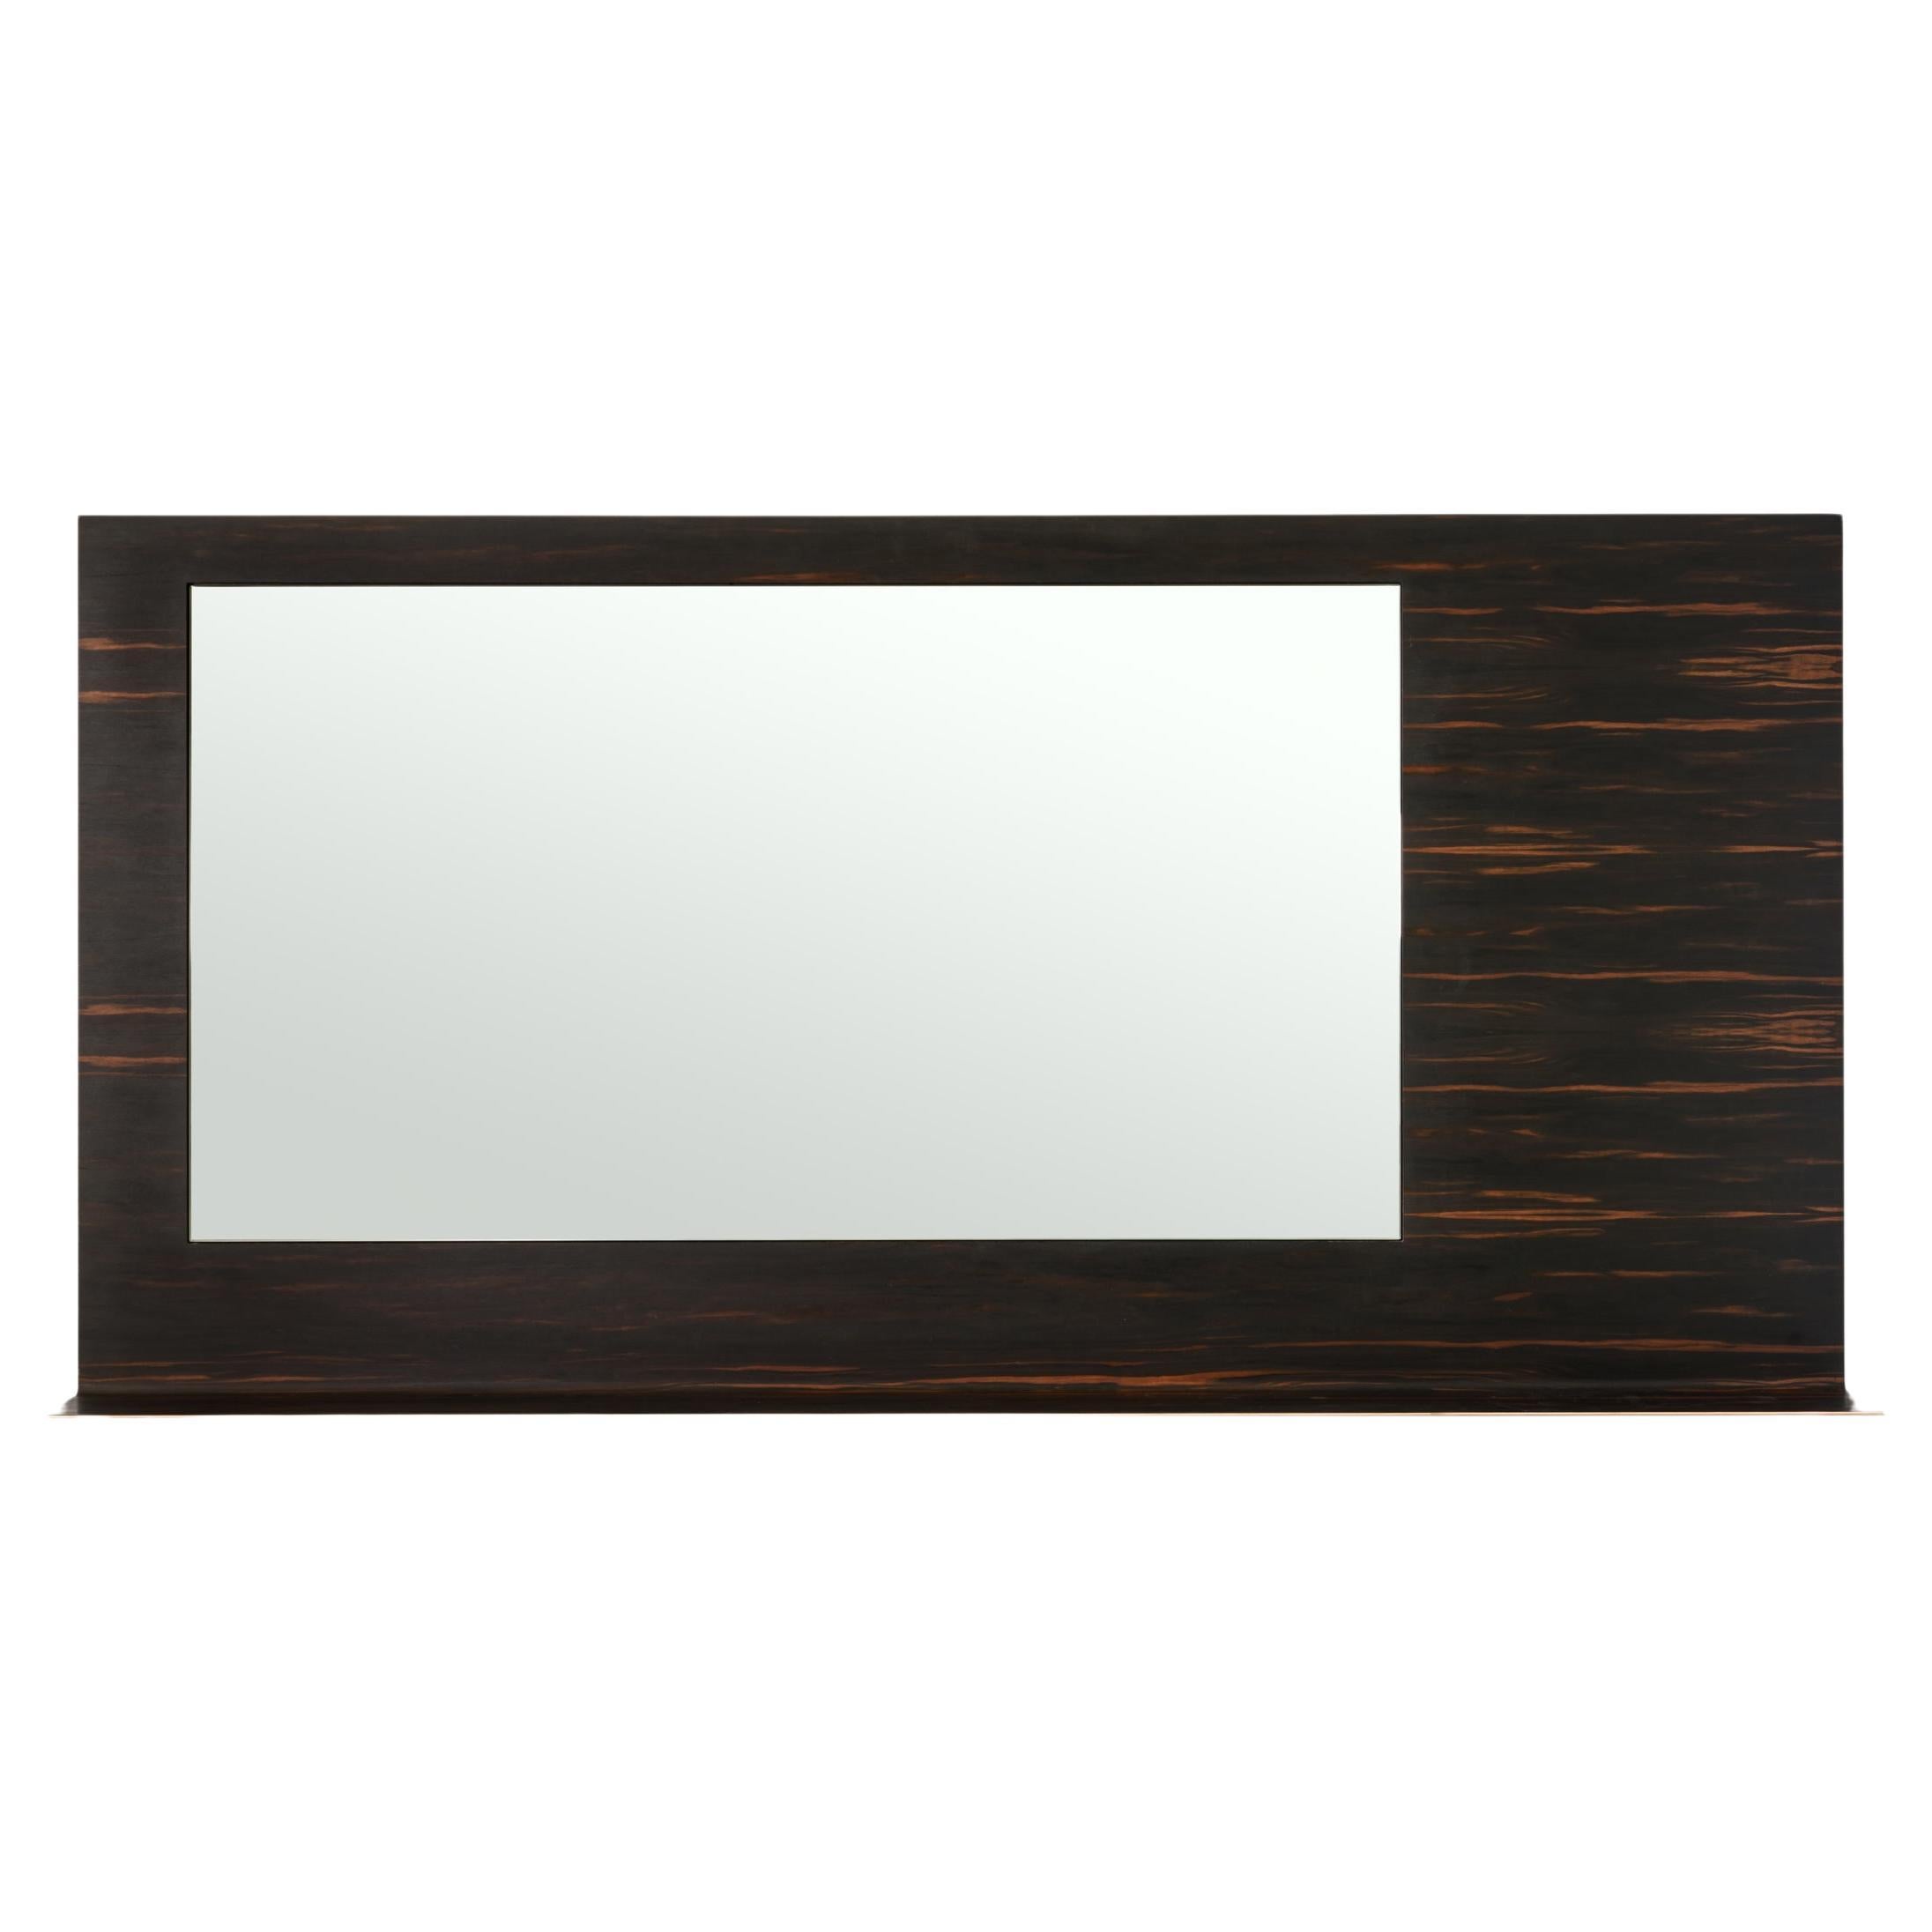 A sheet of Solid Bronze veneered in African Ebony surrounds a recessed mirror, folding itself out into a shelf for display.

This is a natural product that may have slight imperfections. This is the beauty of the product and makes it unique from